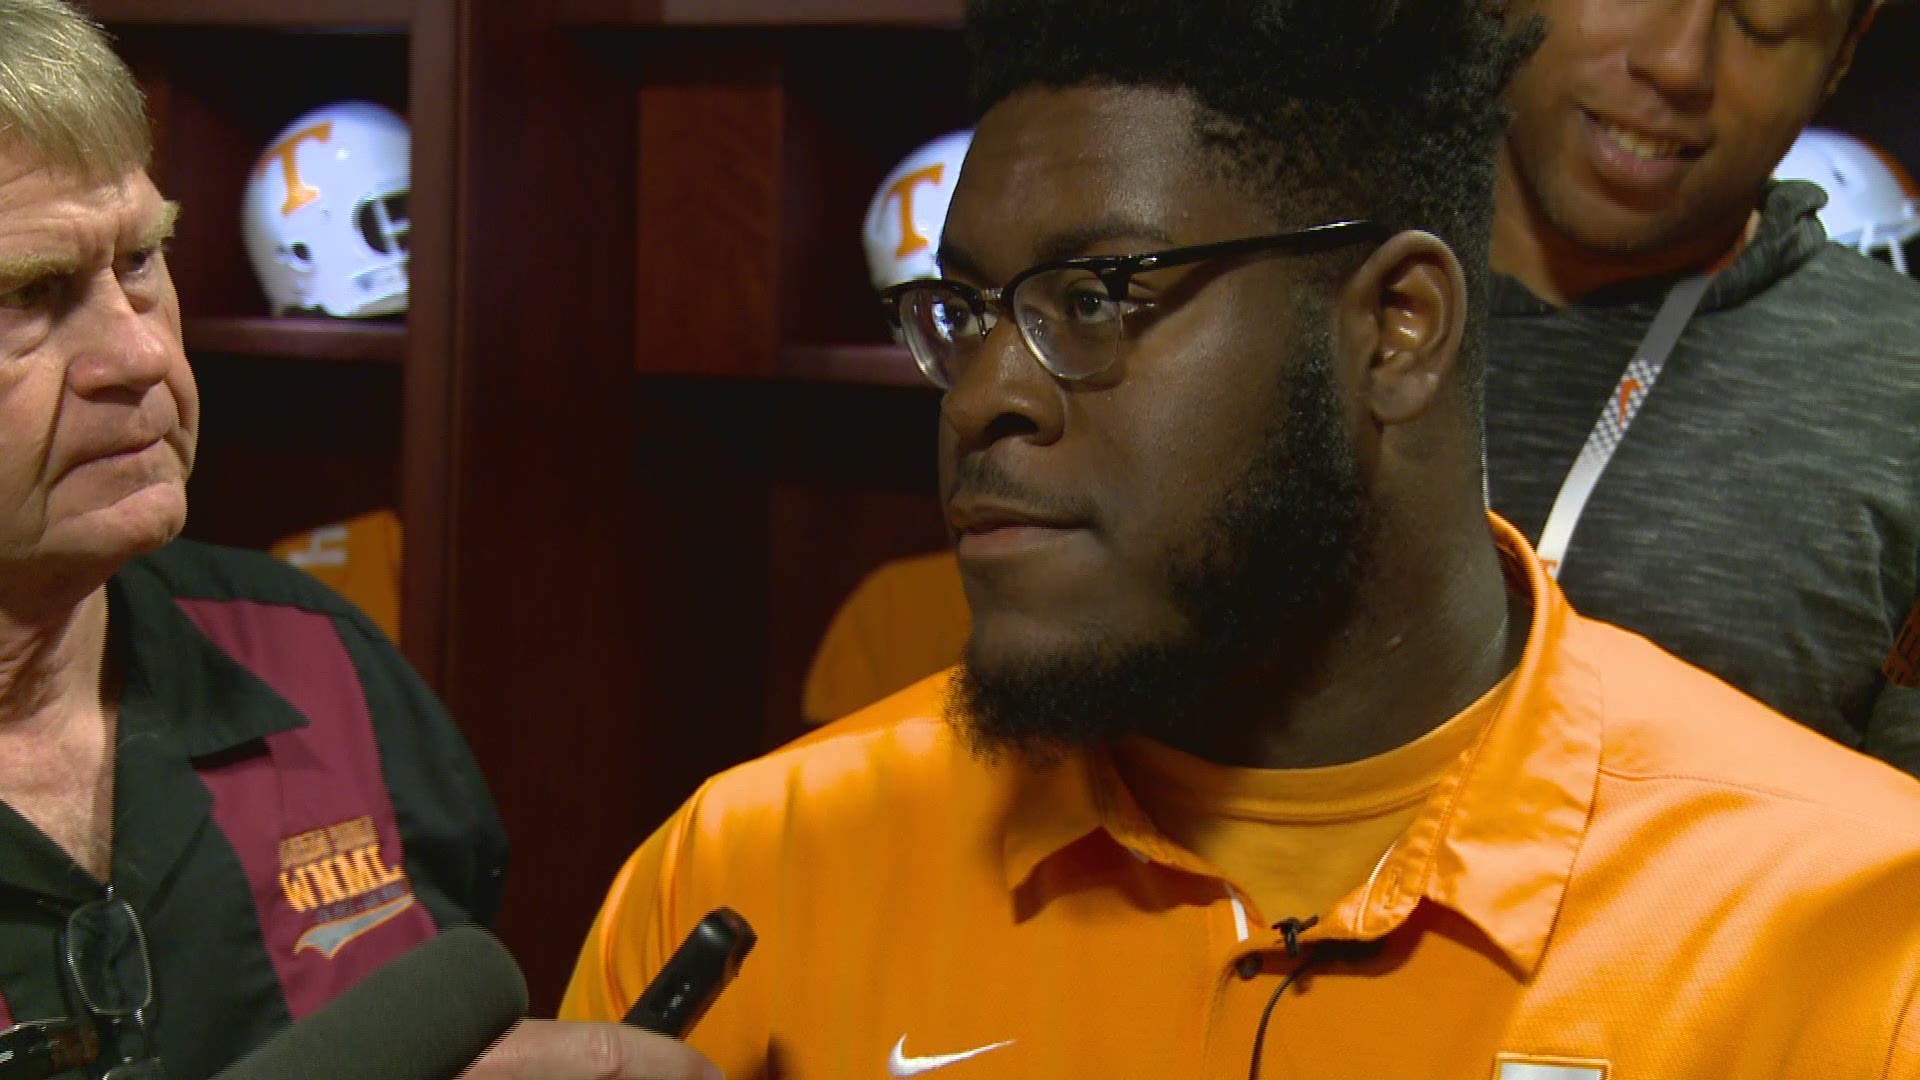 Trey Smith discusses the months leading up to his return to football and how his faith kept his spirits high.